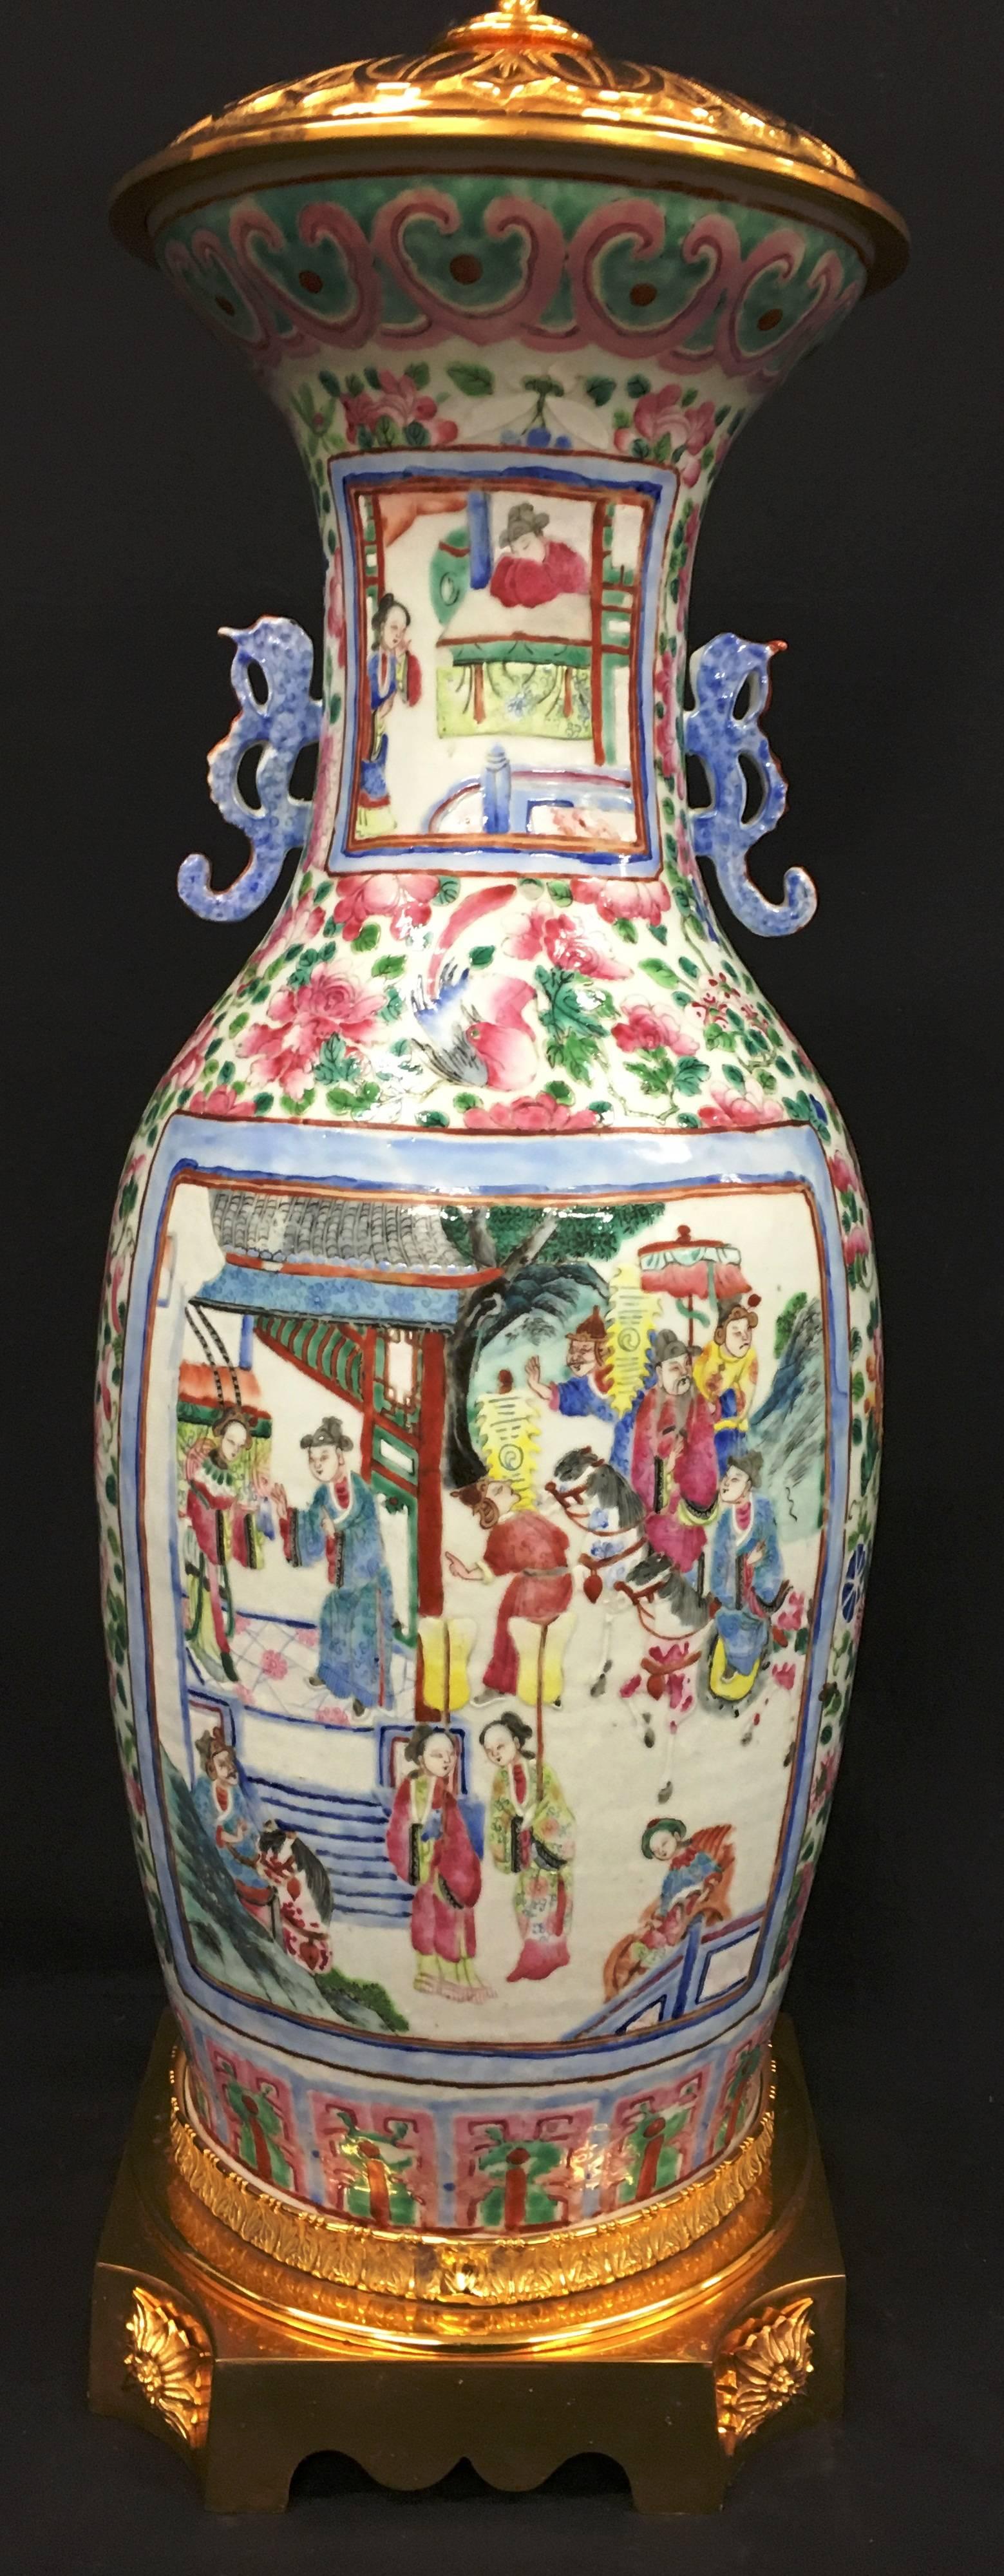 An impressive 19th century Chinese Famille rose vase or lamp. Having beautifully painted panels depicting mortals in a temple and gardens, set in a floral surrounds and having gilded ormolu mounts.